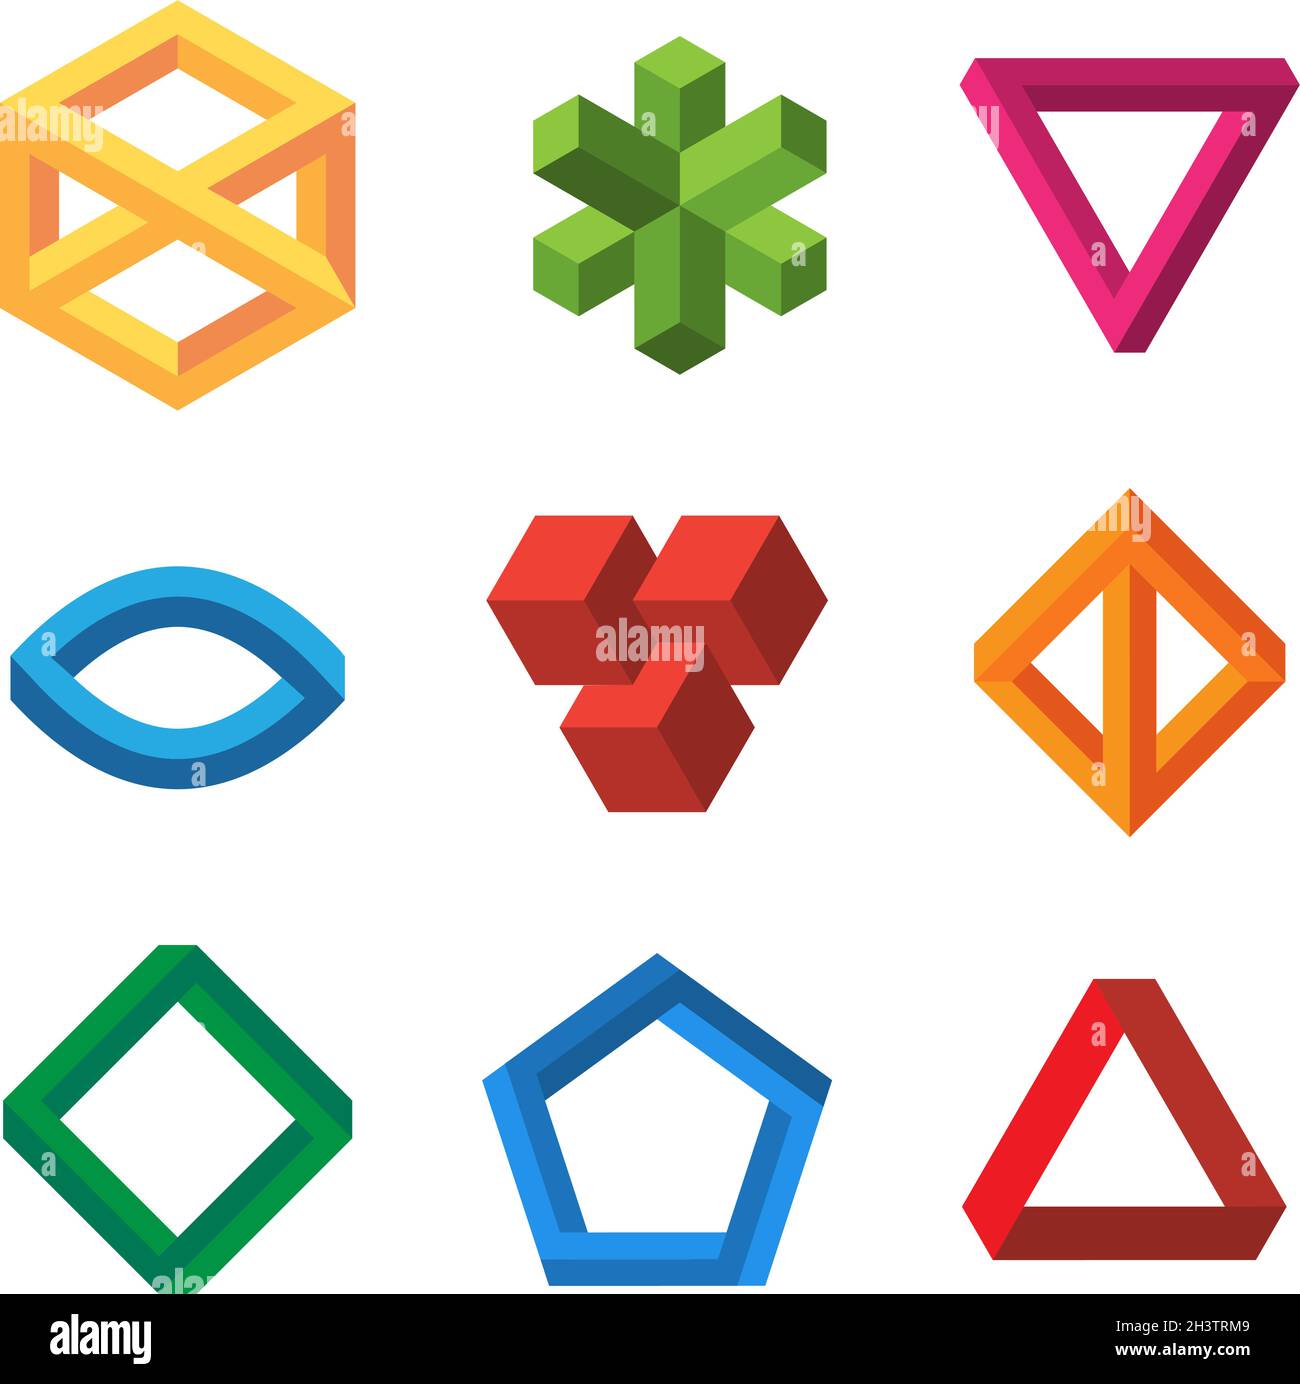 Infinity illusions geometry. Impossible 3d shapes triangles loop hexagons escher vector collection Stock Vector